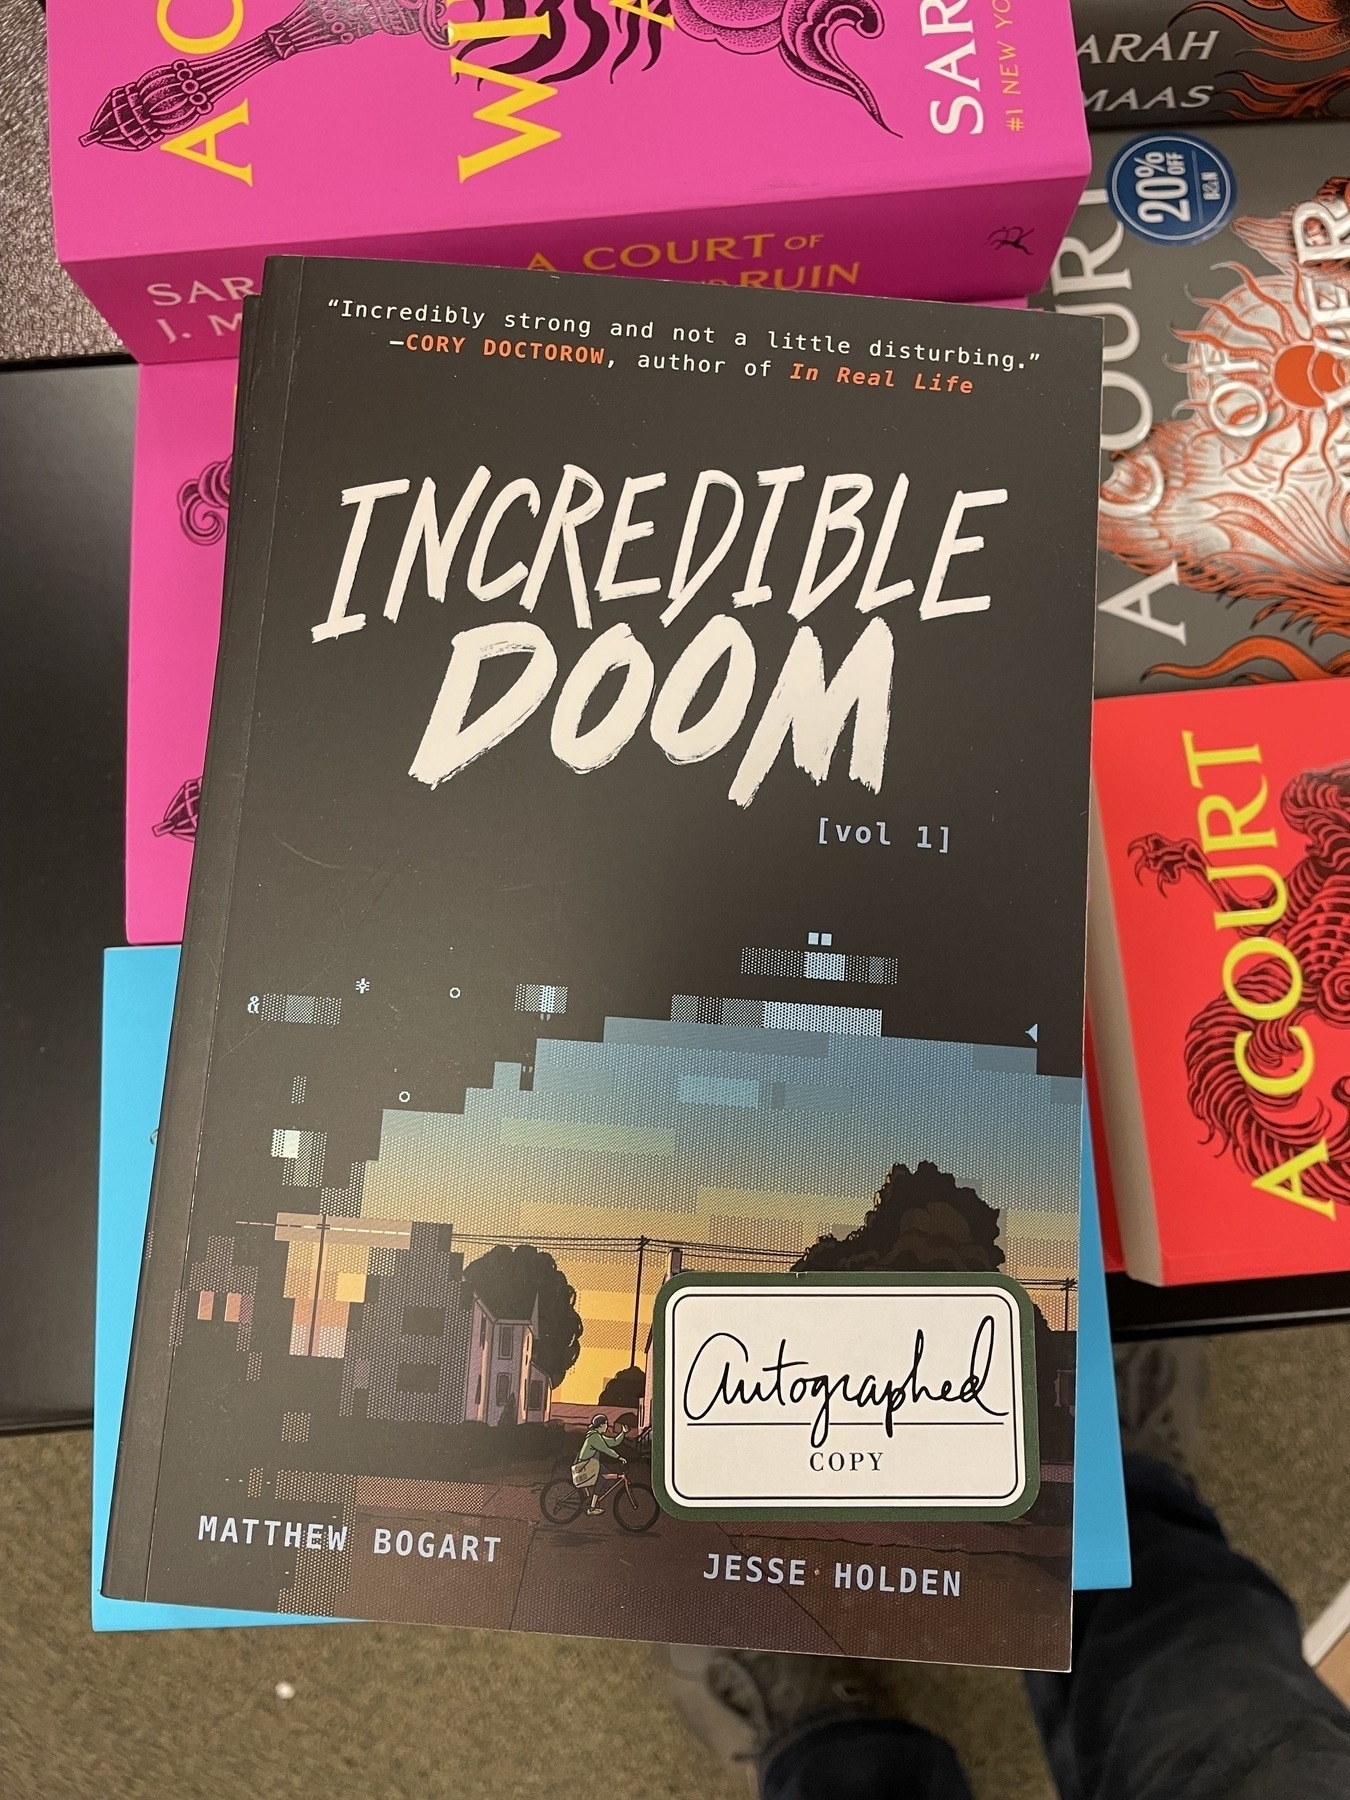 A copy of the book "Incredible Doom" laying on a stack of other books with a sticker on it that says "Autographed copy"